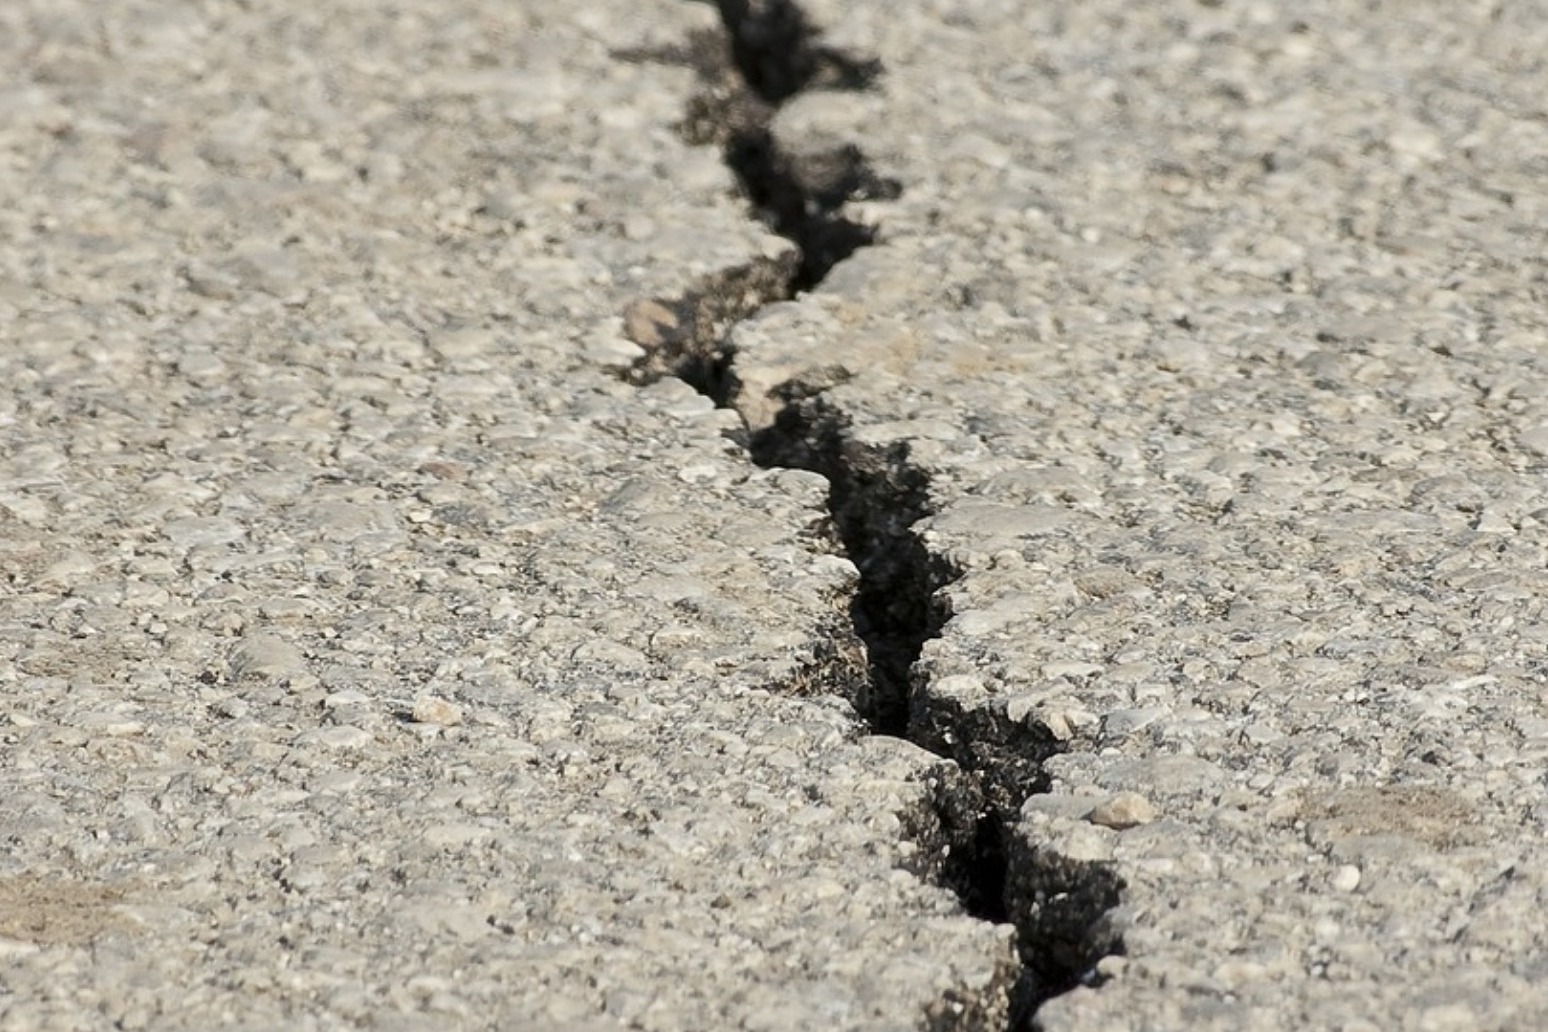 Second strong quake hits Southern California 